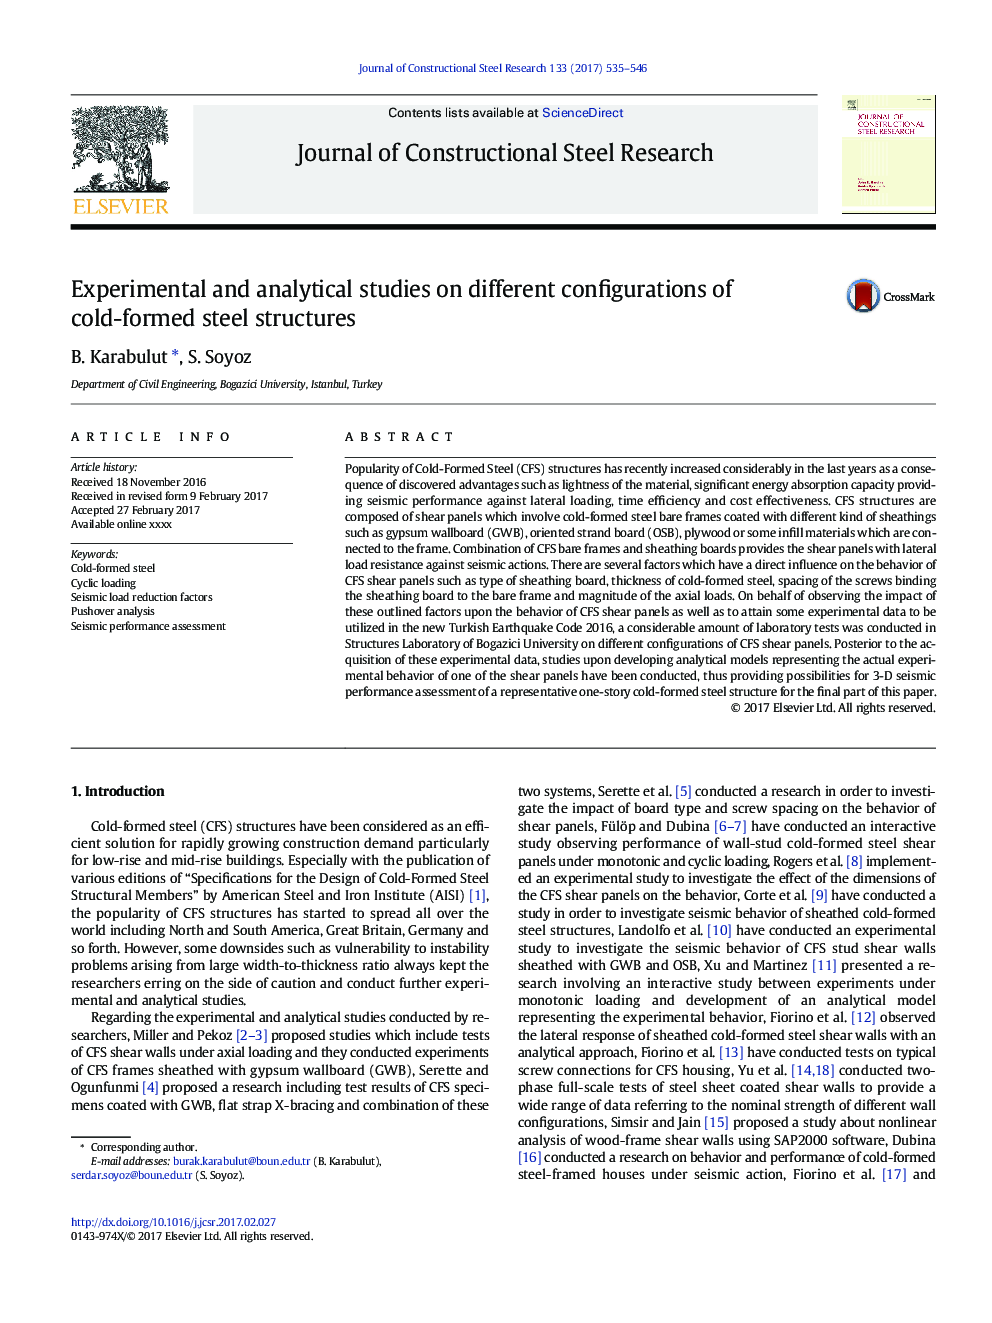 Experimental and analytical studies on different configurations of cold-formed steel structures